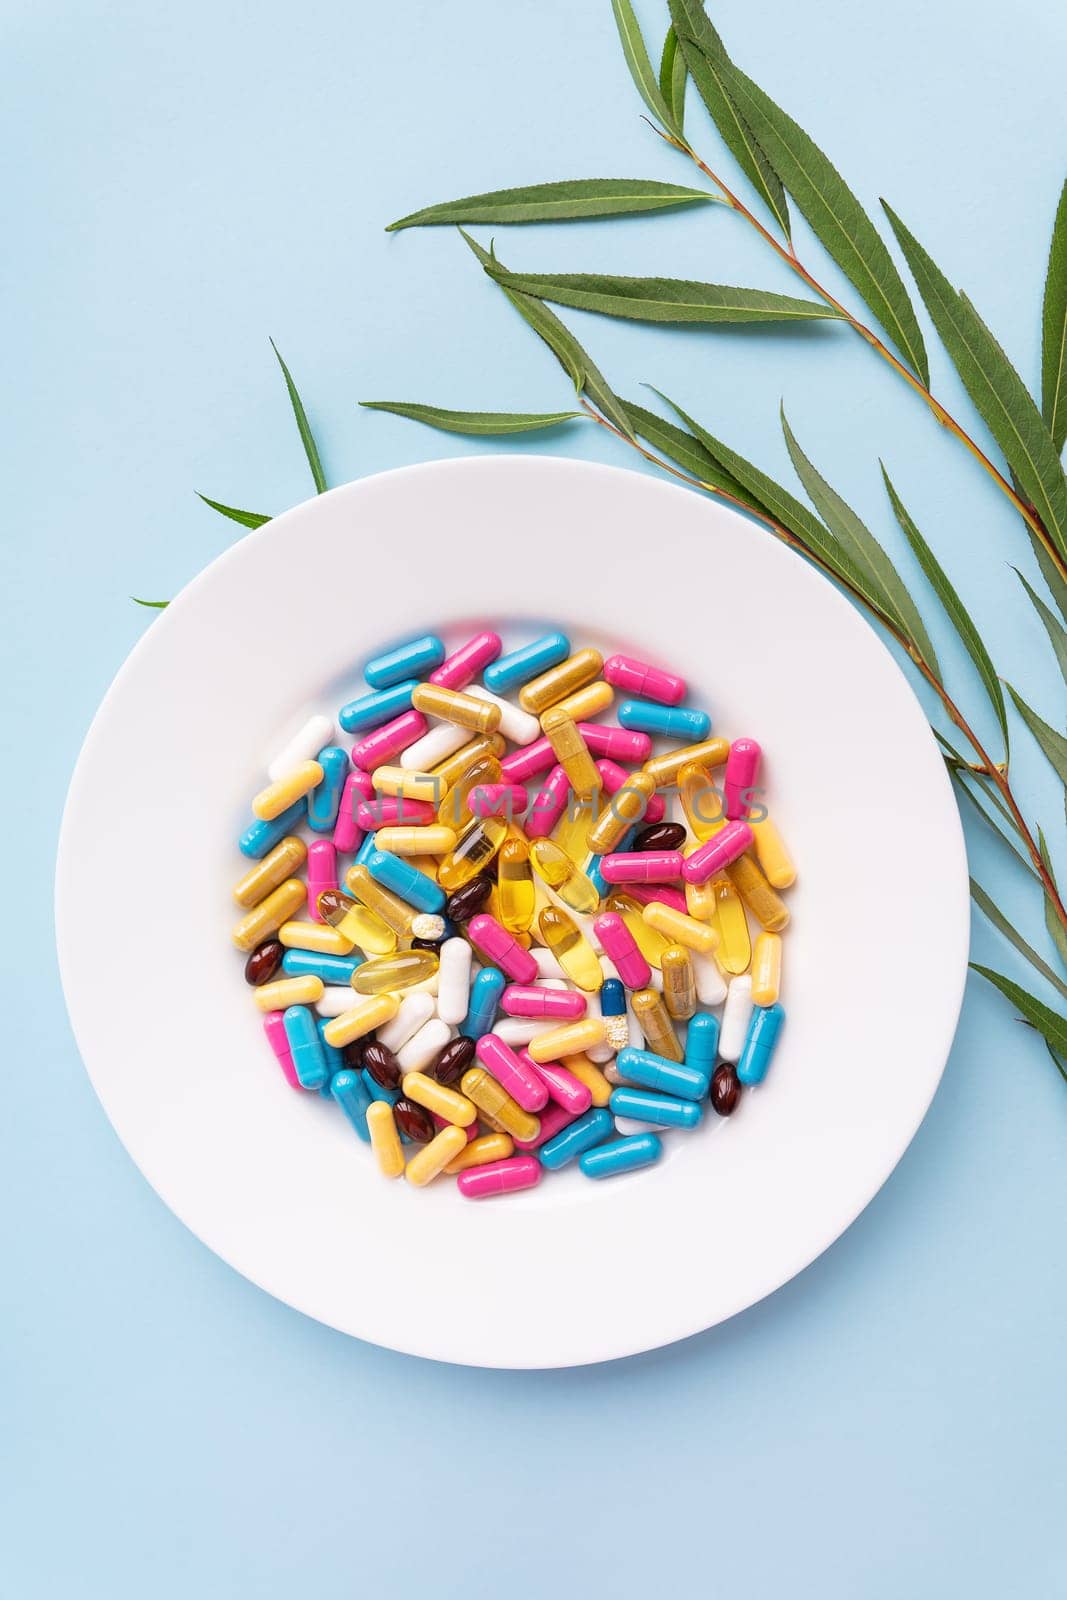 Many colorful pills, nutritional supplements in a white plate on a blue background. Prescription medicine, vertical photo